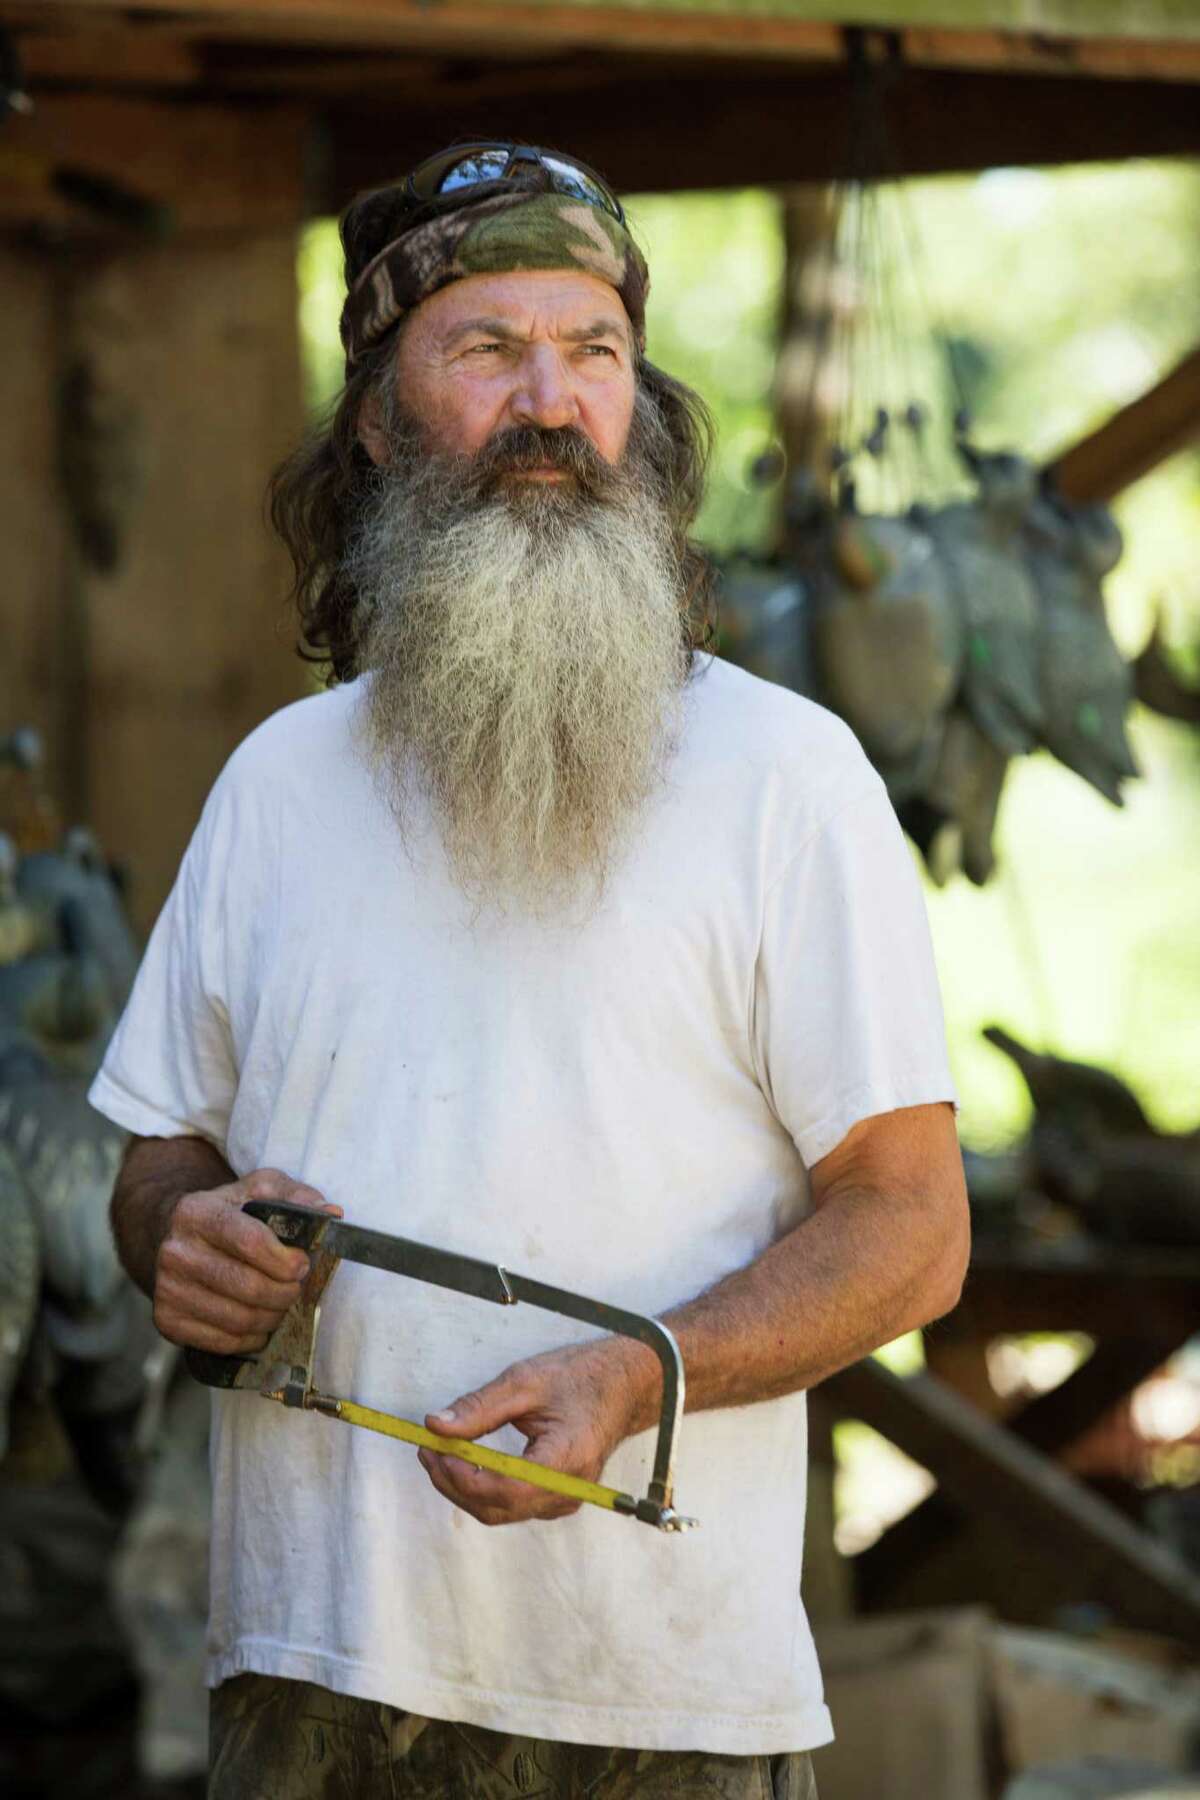 A&E shows Phil Robertson from the popular series "Duck Dynasty," was suspended for disparaging comments he made to GQ magazine about gay people. There is debate about whether he made an actual apology but in part he said, "I centered my life around sex, drugs and rock and roll until I hit rock bottom and accepted Jesus as my Savior. My mission today is to go forth and tell people about why I follow Christ and also what the bible teaches, and part of that teaching is that women and men are meant to be together. However, I would never treat anyone with disrespect just because they are different from me...."